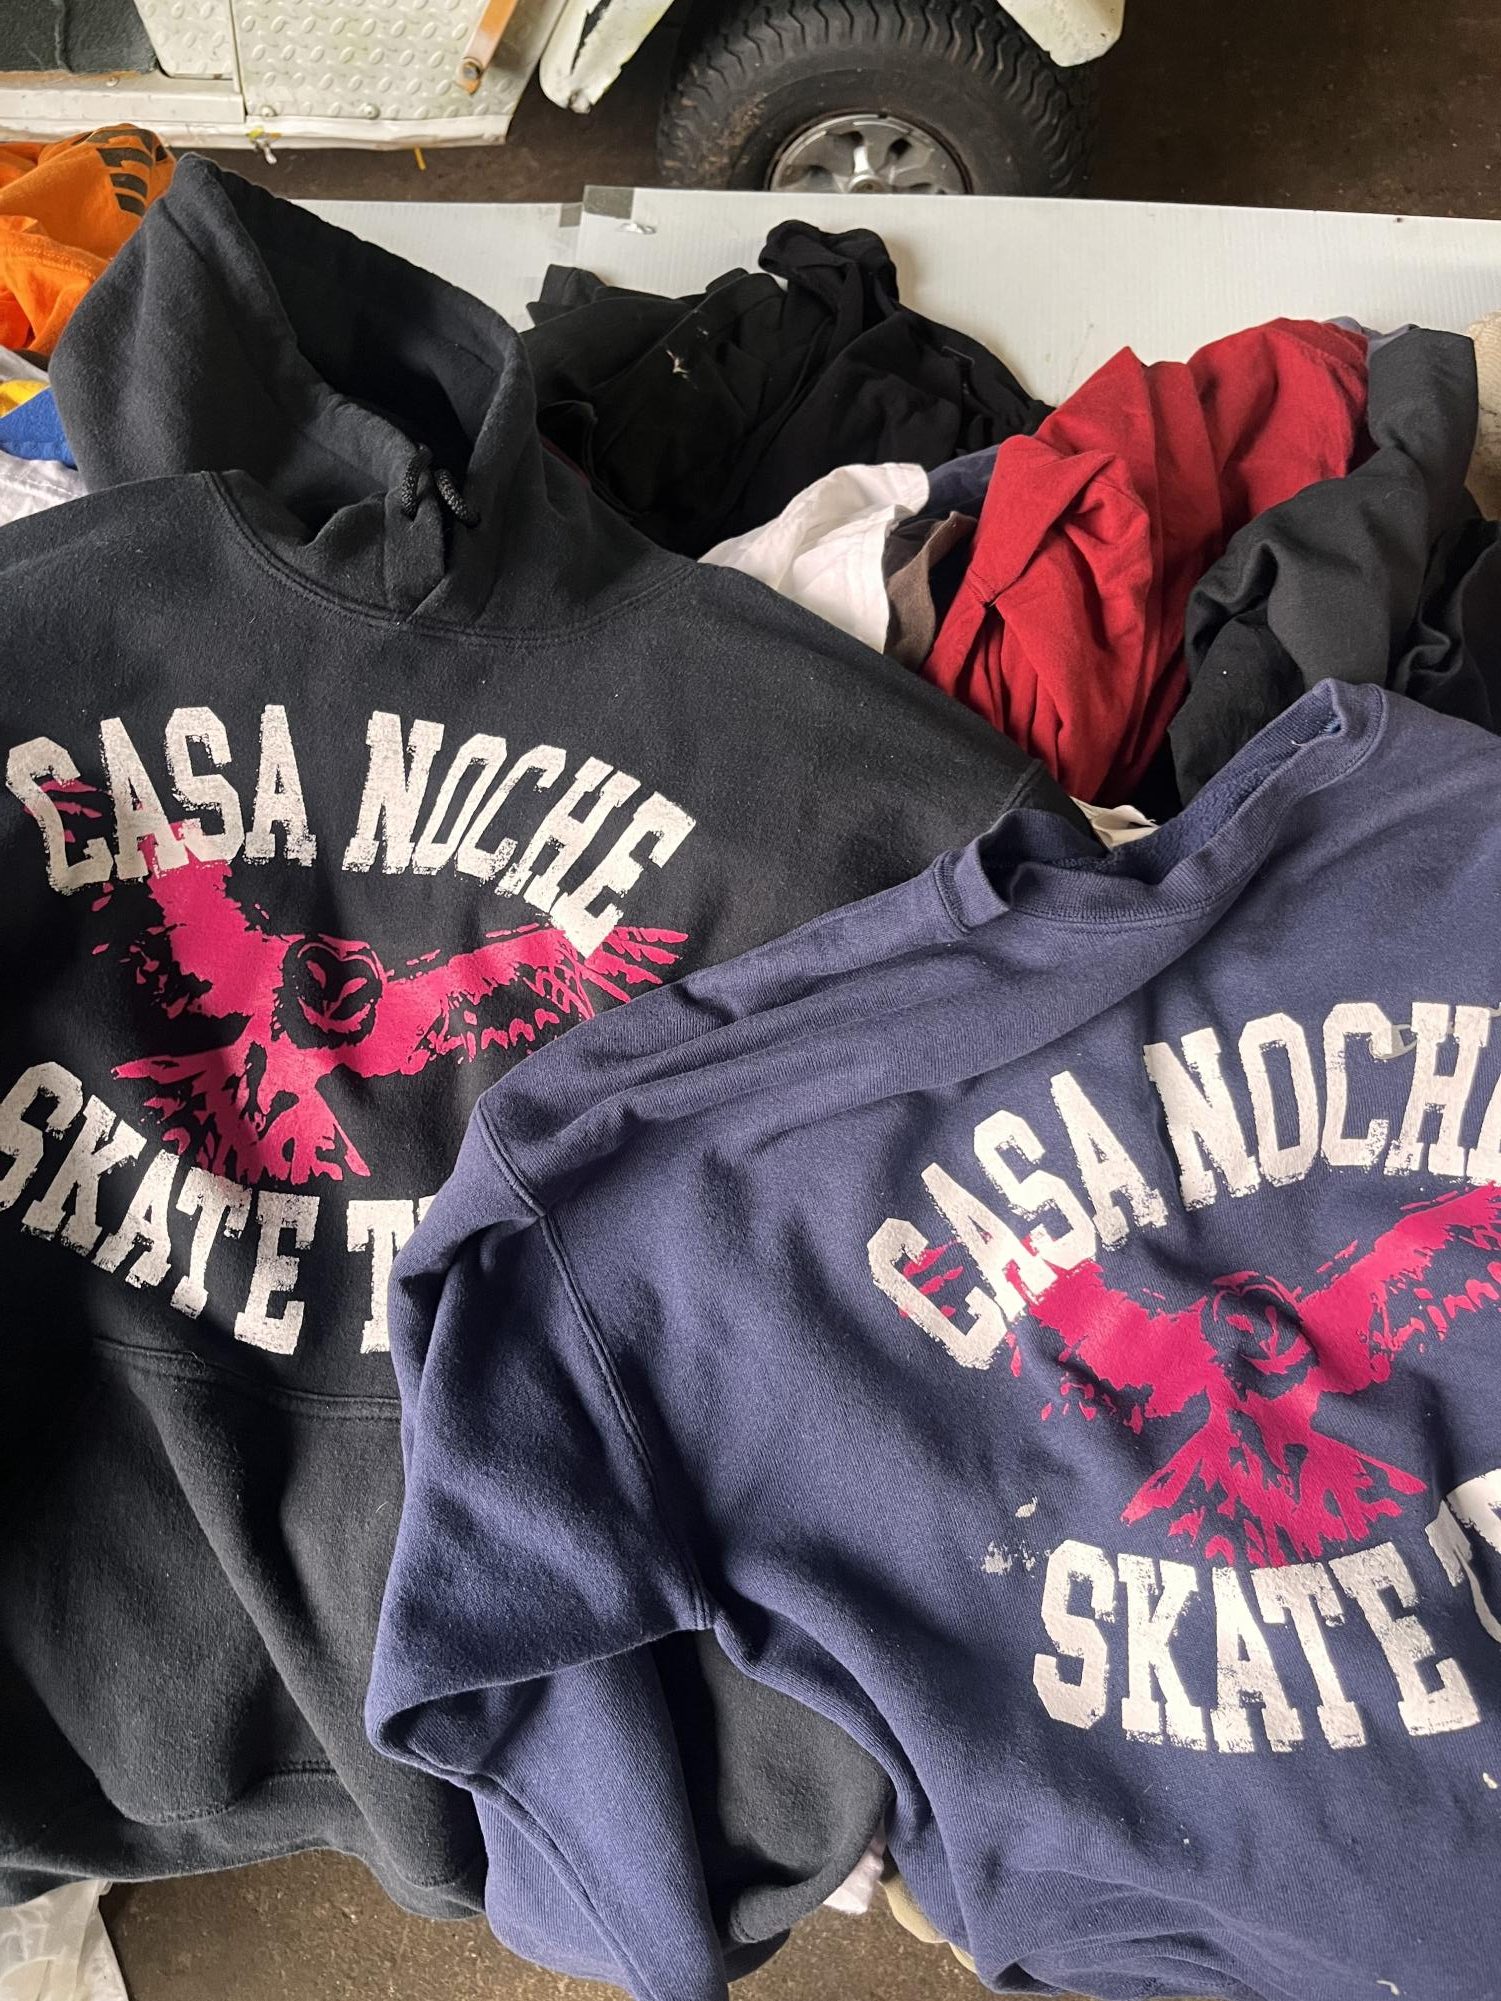 In preparation for a pop-up event, business owners Jonah Vignier and Isaiah Greenidge set up Casa Noche skate merchandise. We have got to find the right clothes [for the audience], Greenidge said. If we have a bunch of music tees, were gonna go to the music store. If weve got a bunch of sport shirts, were gonna go to Dicks Sporting Goods.